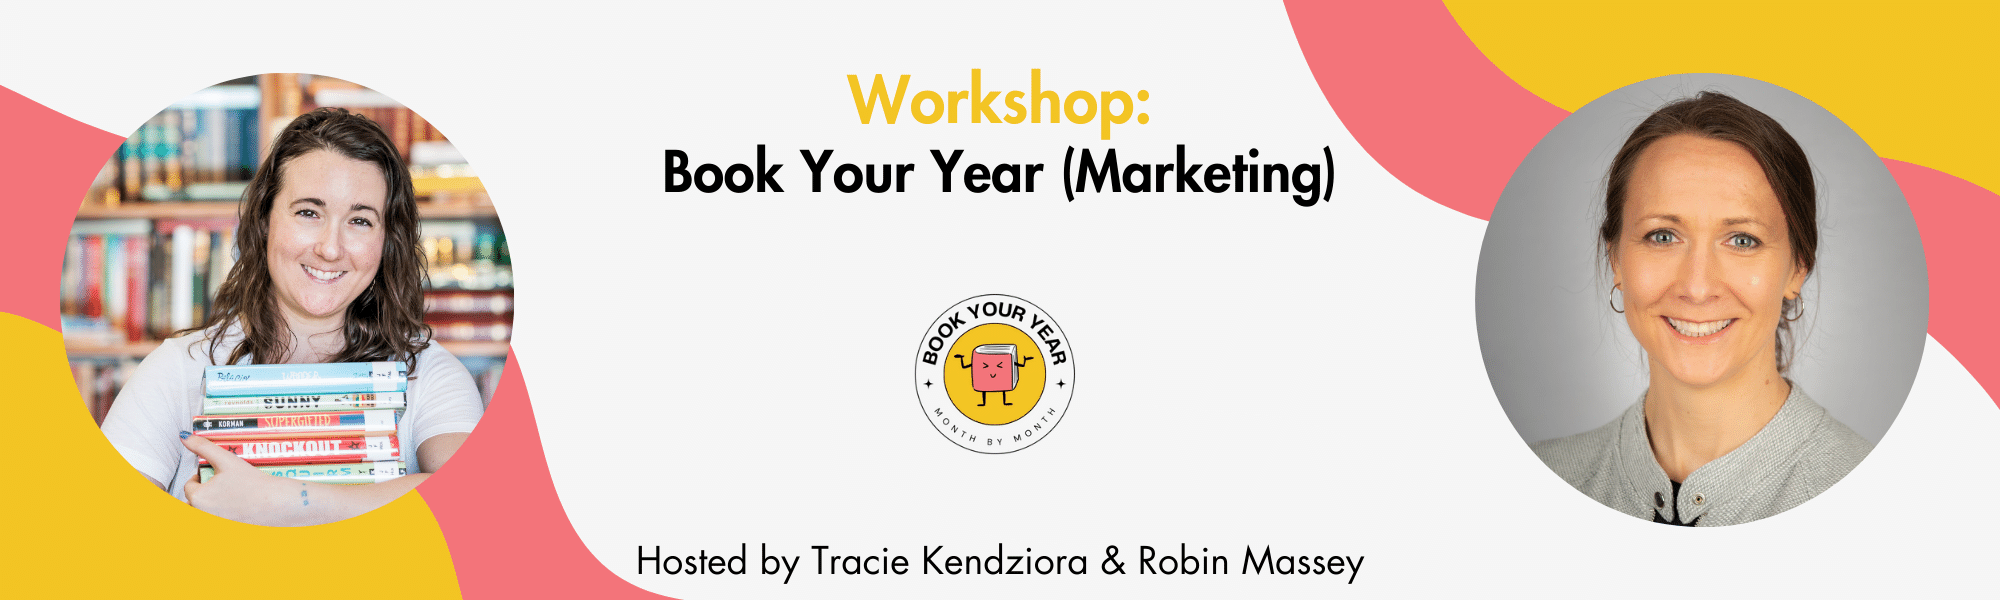 Book Your Year Marketing Workshop with host photos